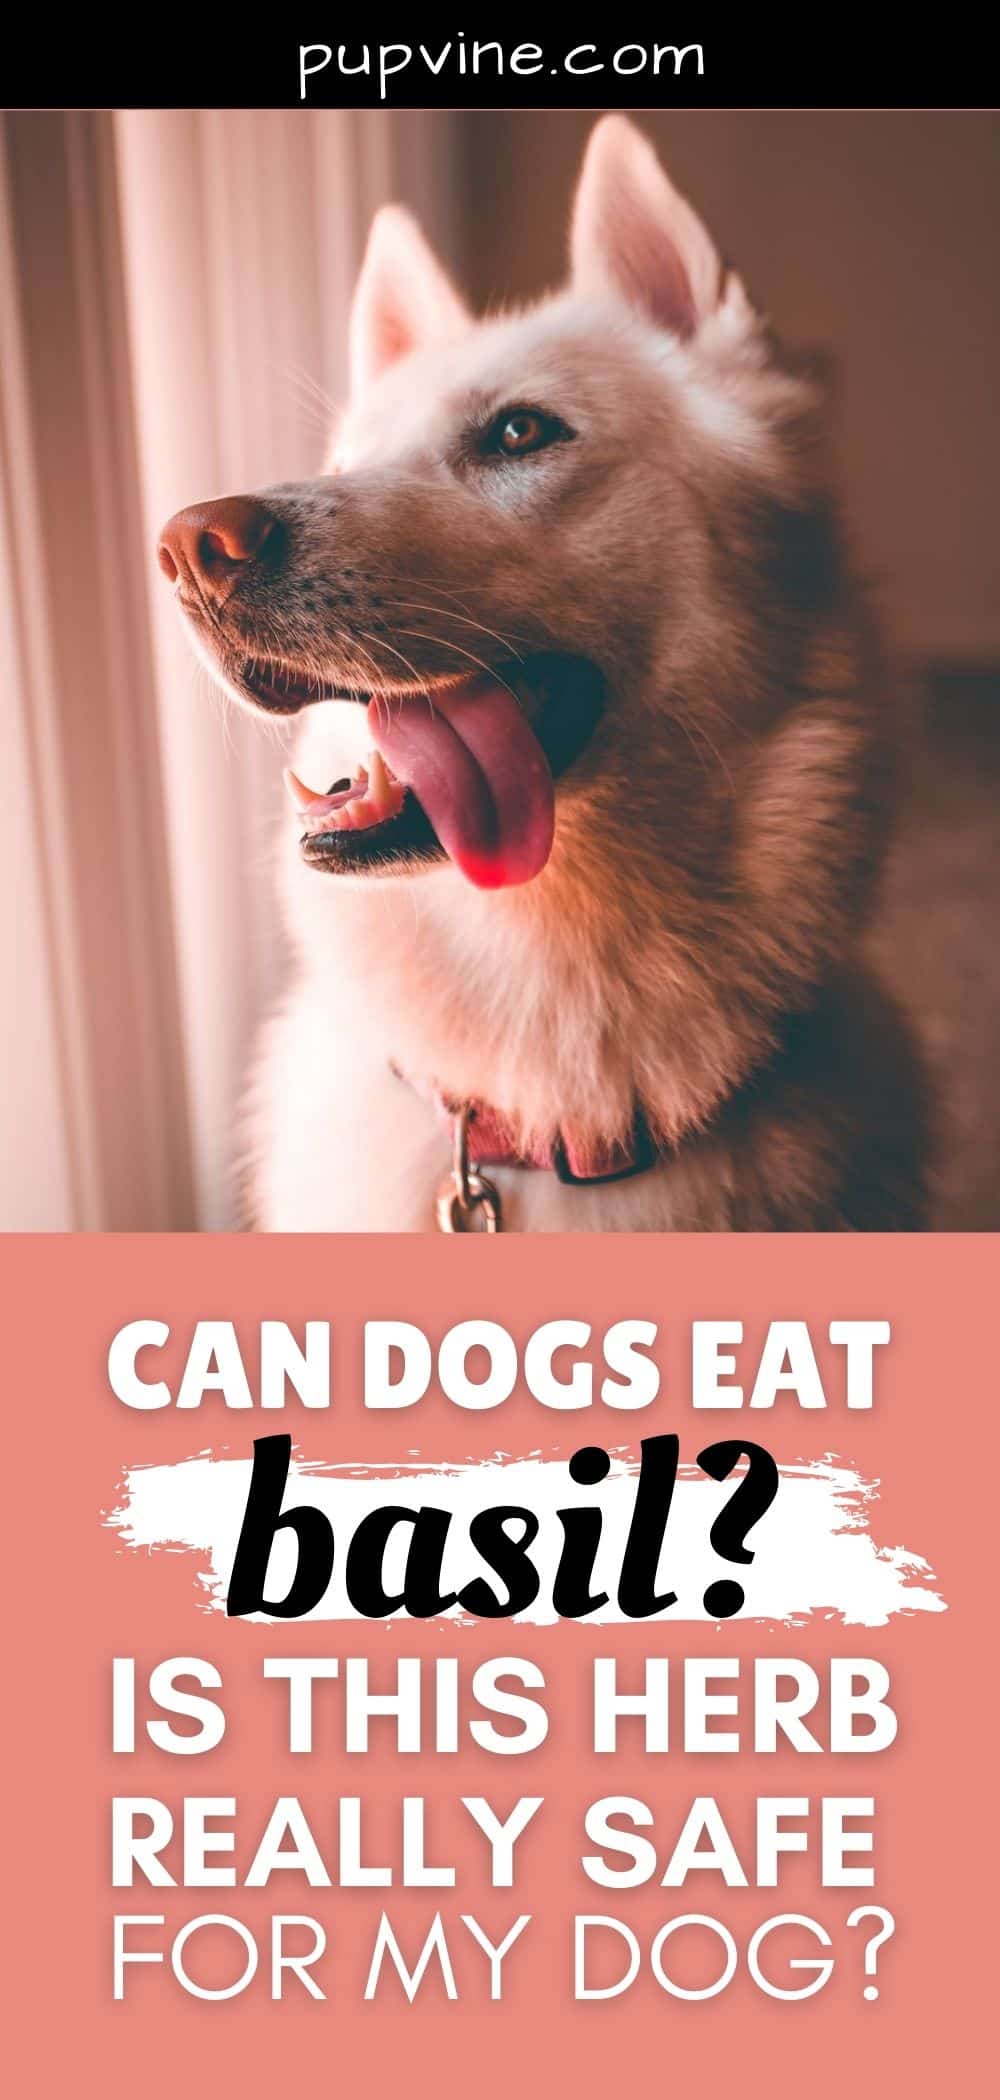 Can Dogs Eat Basil? Is This Herb Really Safe For My Dog?